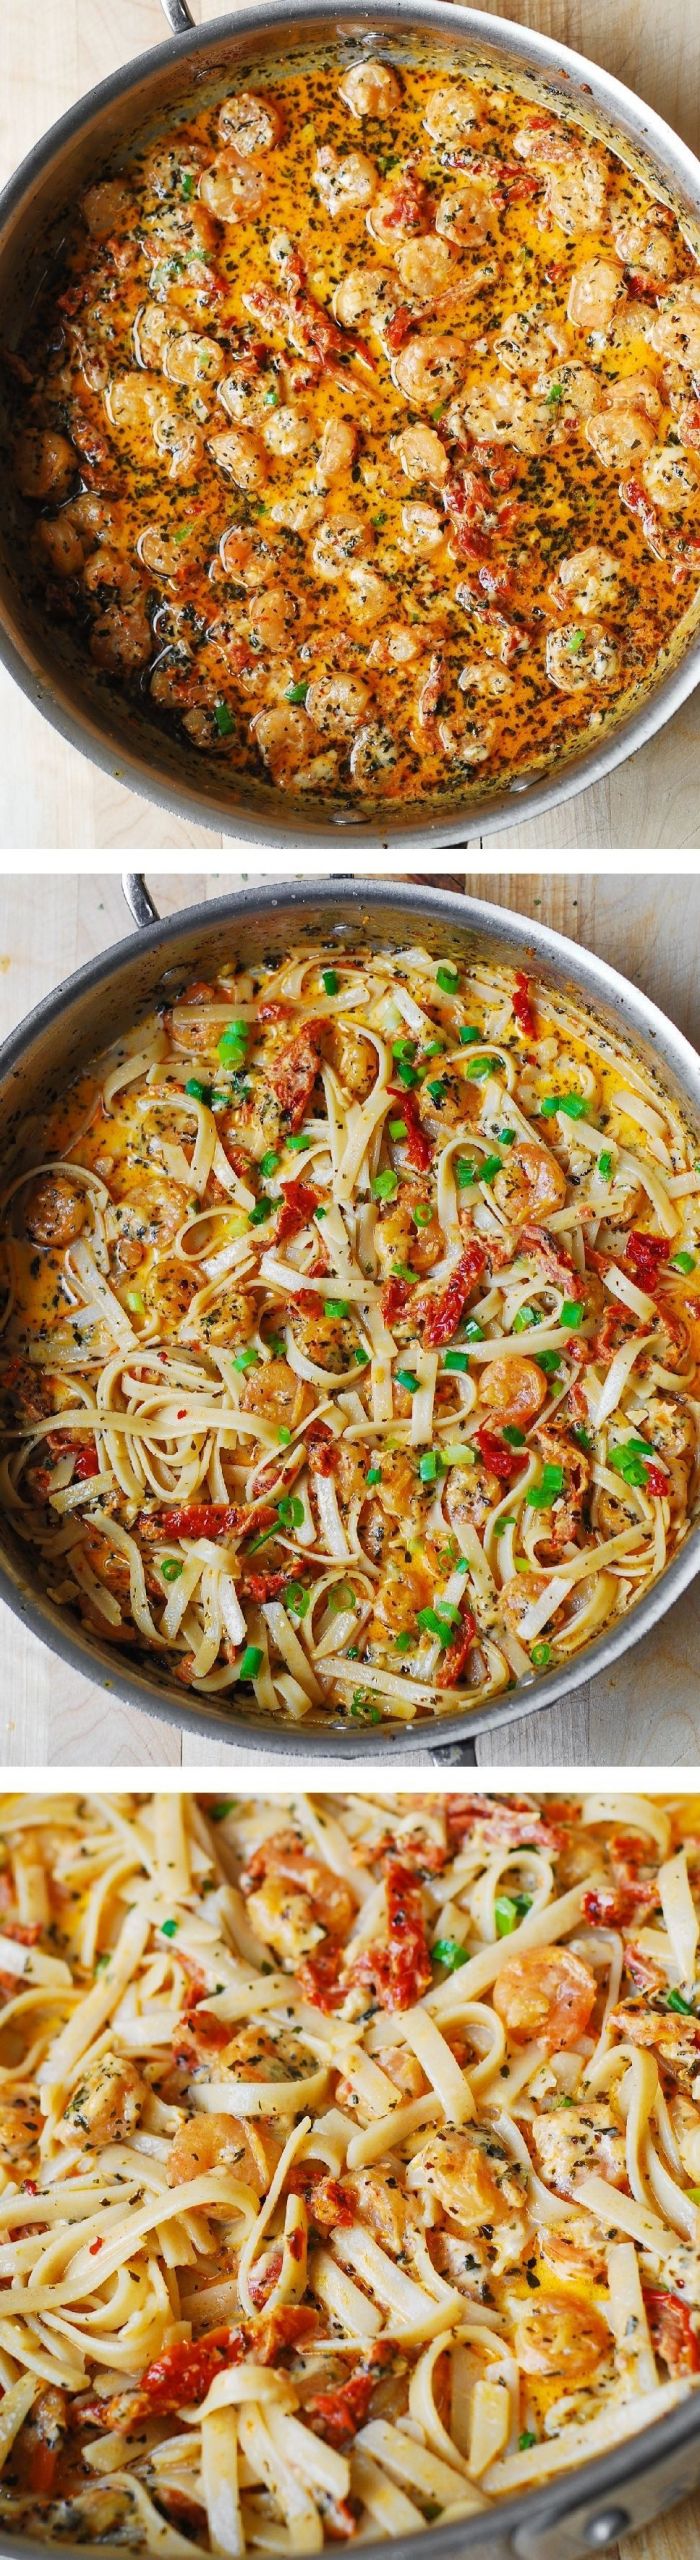 Spicy Shrimp Pasta With Red Sauce
 Garlic Shrimp and Sun Dried Tomatoes with Pasta in Spicy